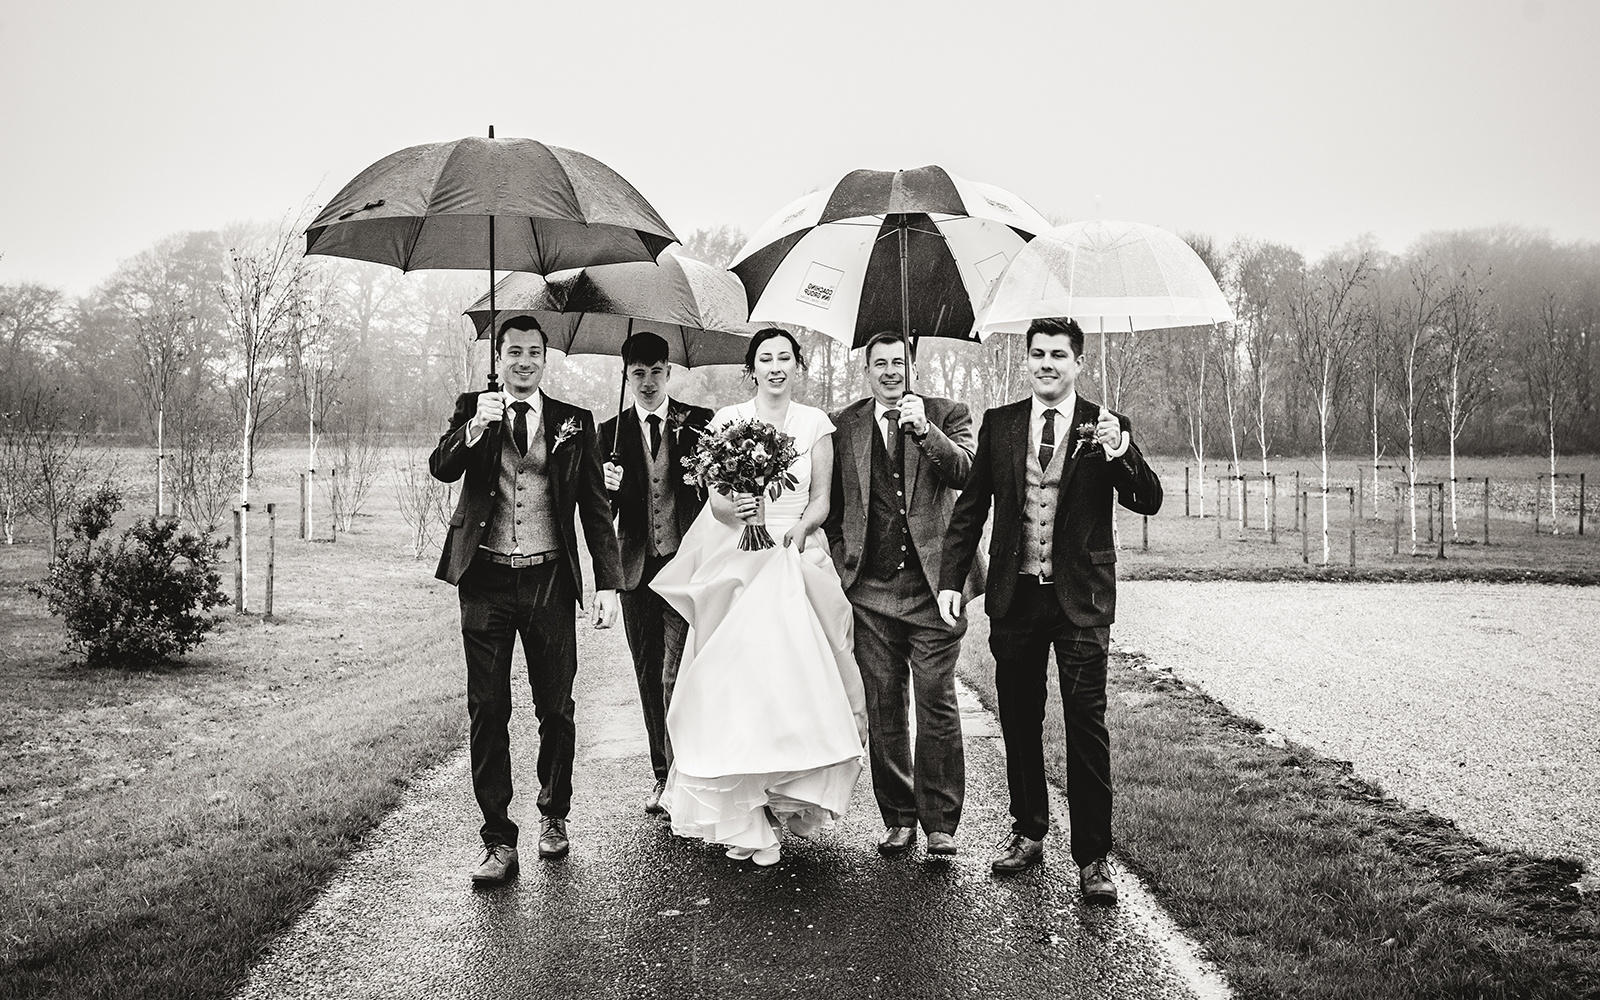 Capture Every Moment wedding photography duo from Cirencester reportage traditional photographers Lapstone Barn Chipping Campden Cotswolds venue Bride Groom Groomsmen Umbrellas shielding from rain